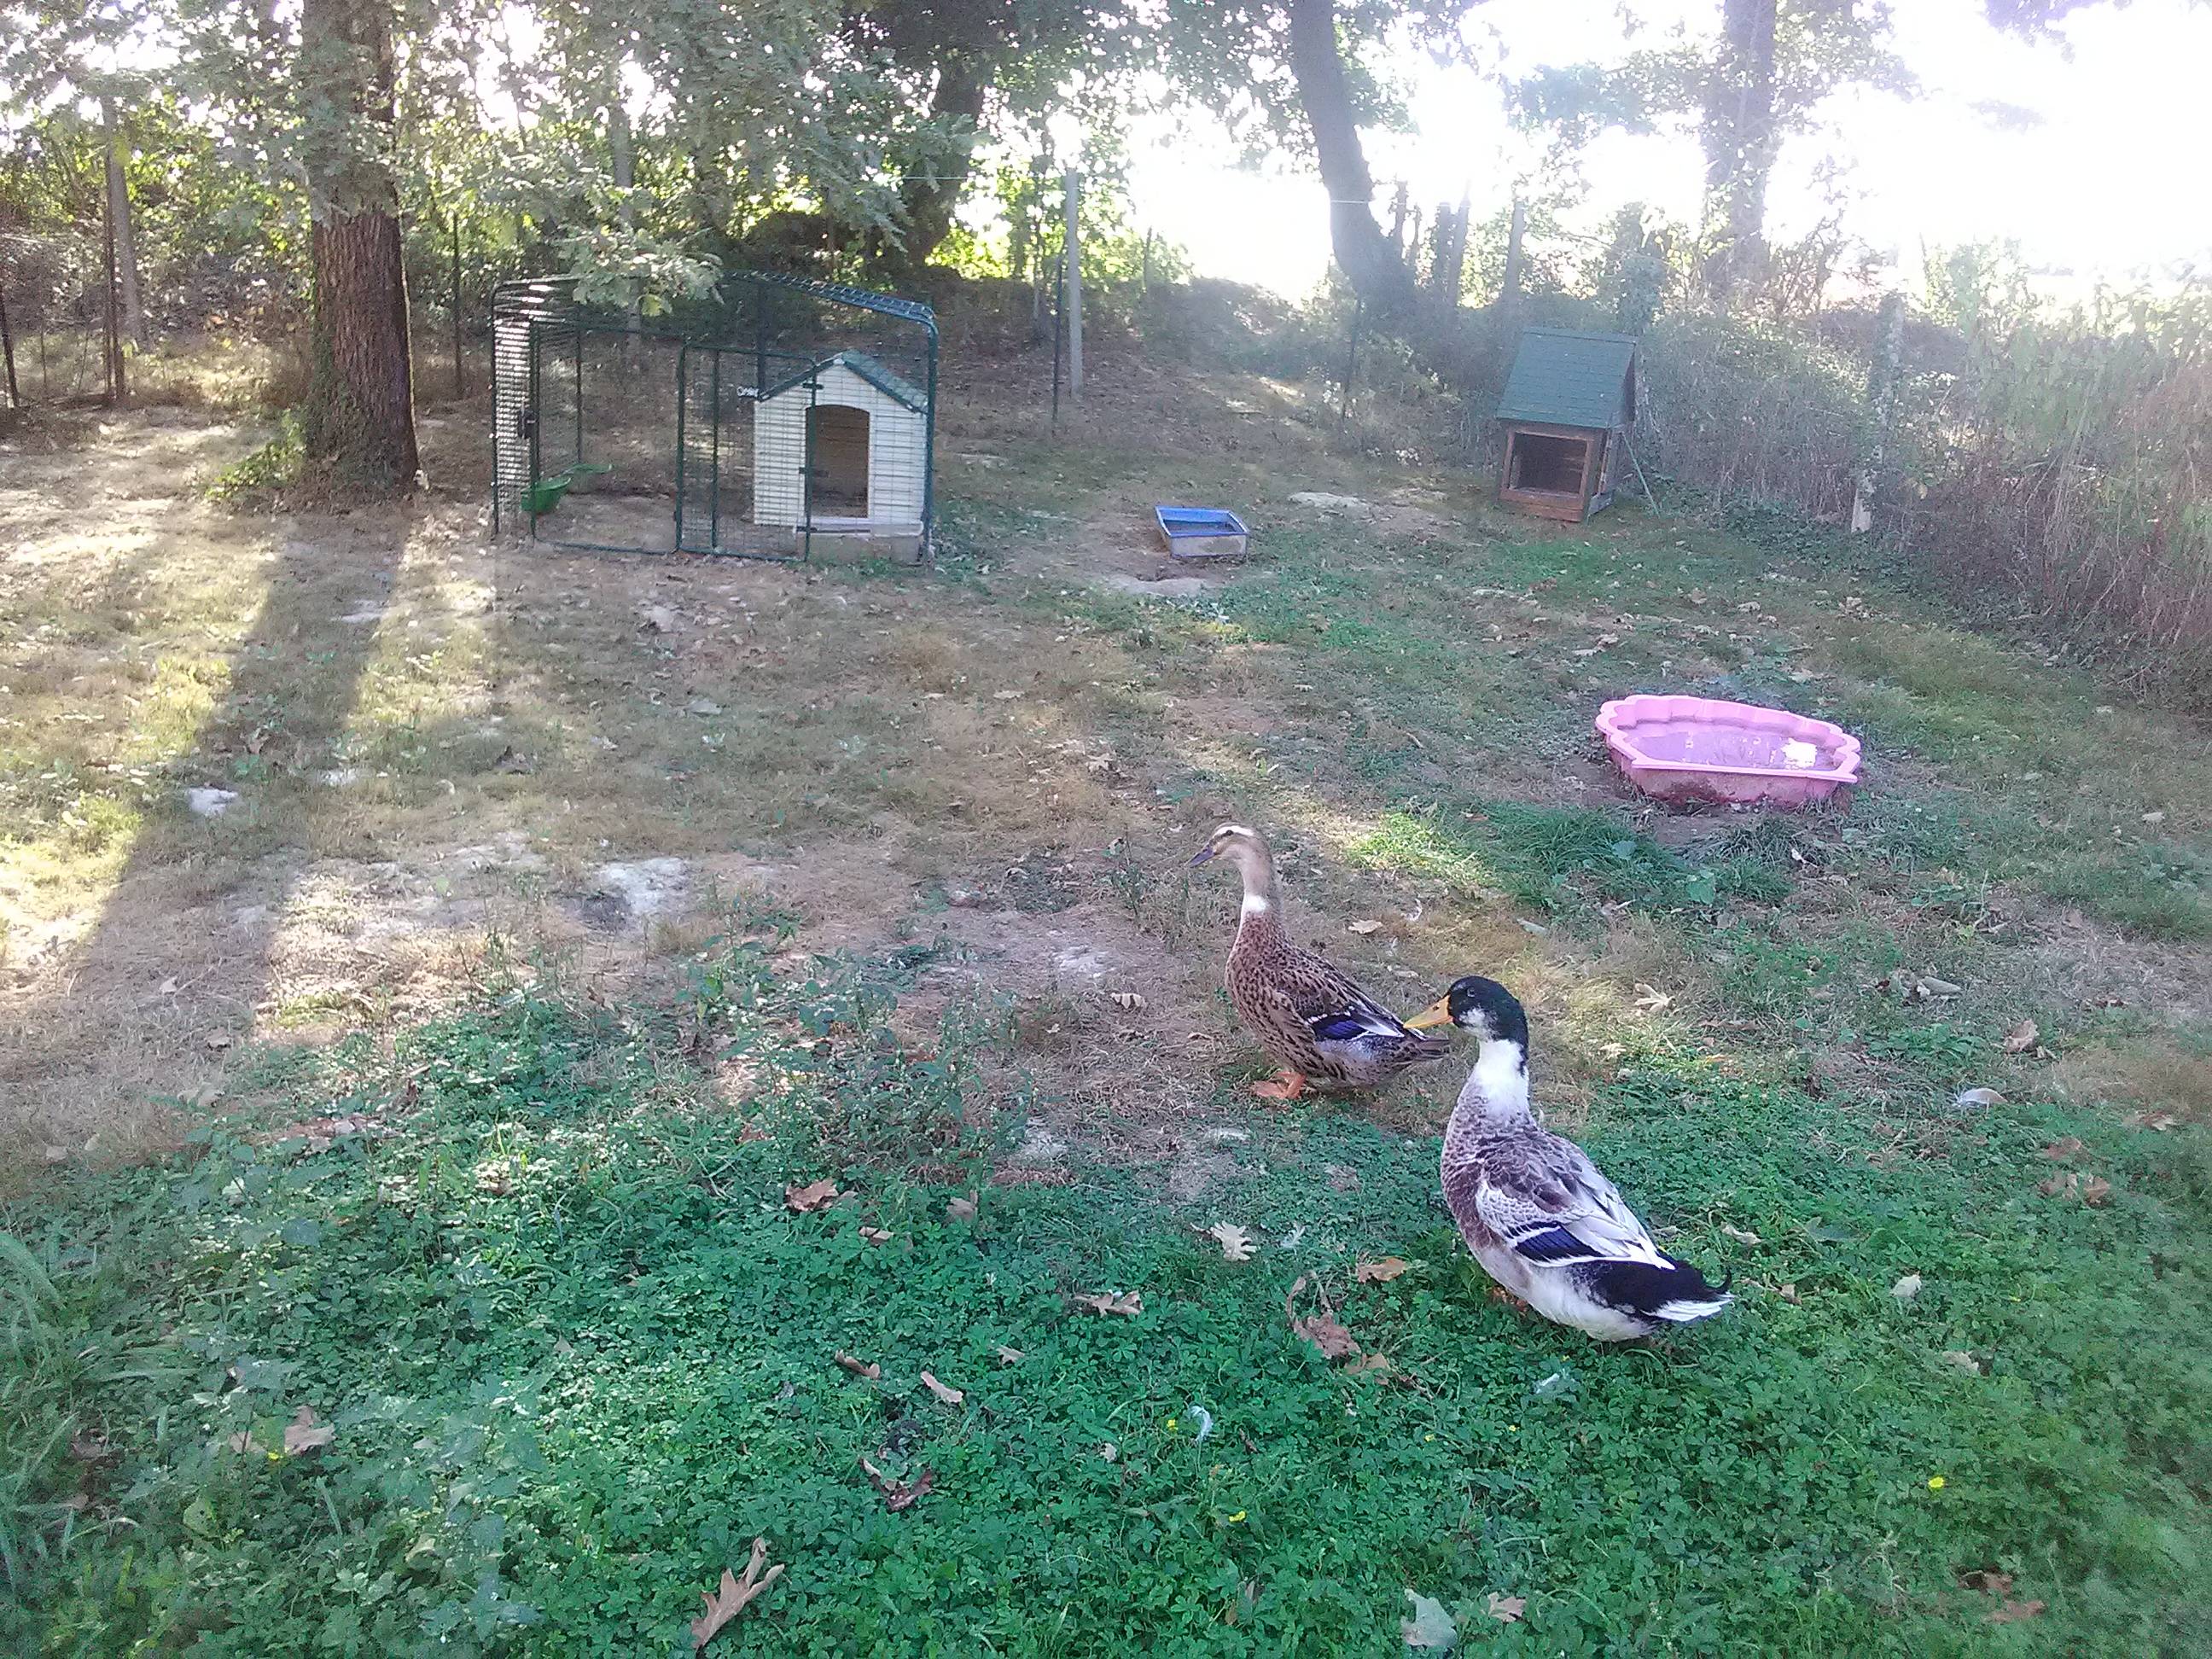 Two ducks on a lawn in a garden with an animal run and a coop